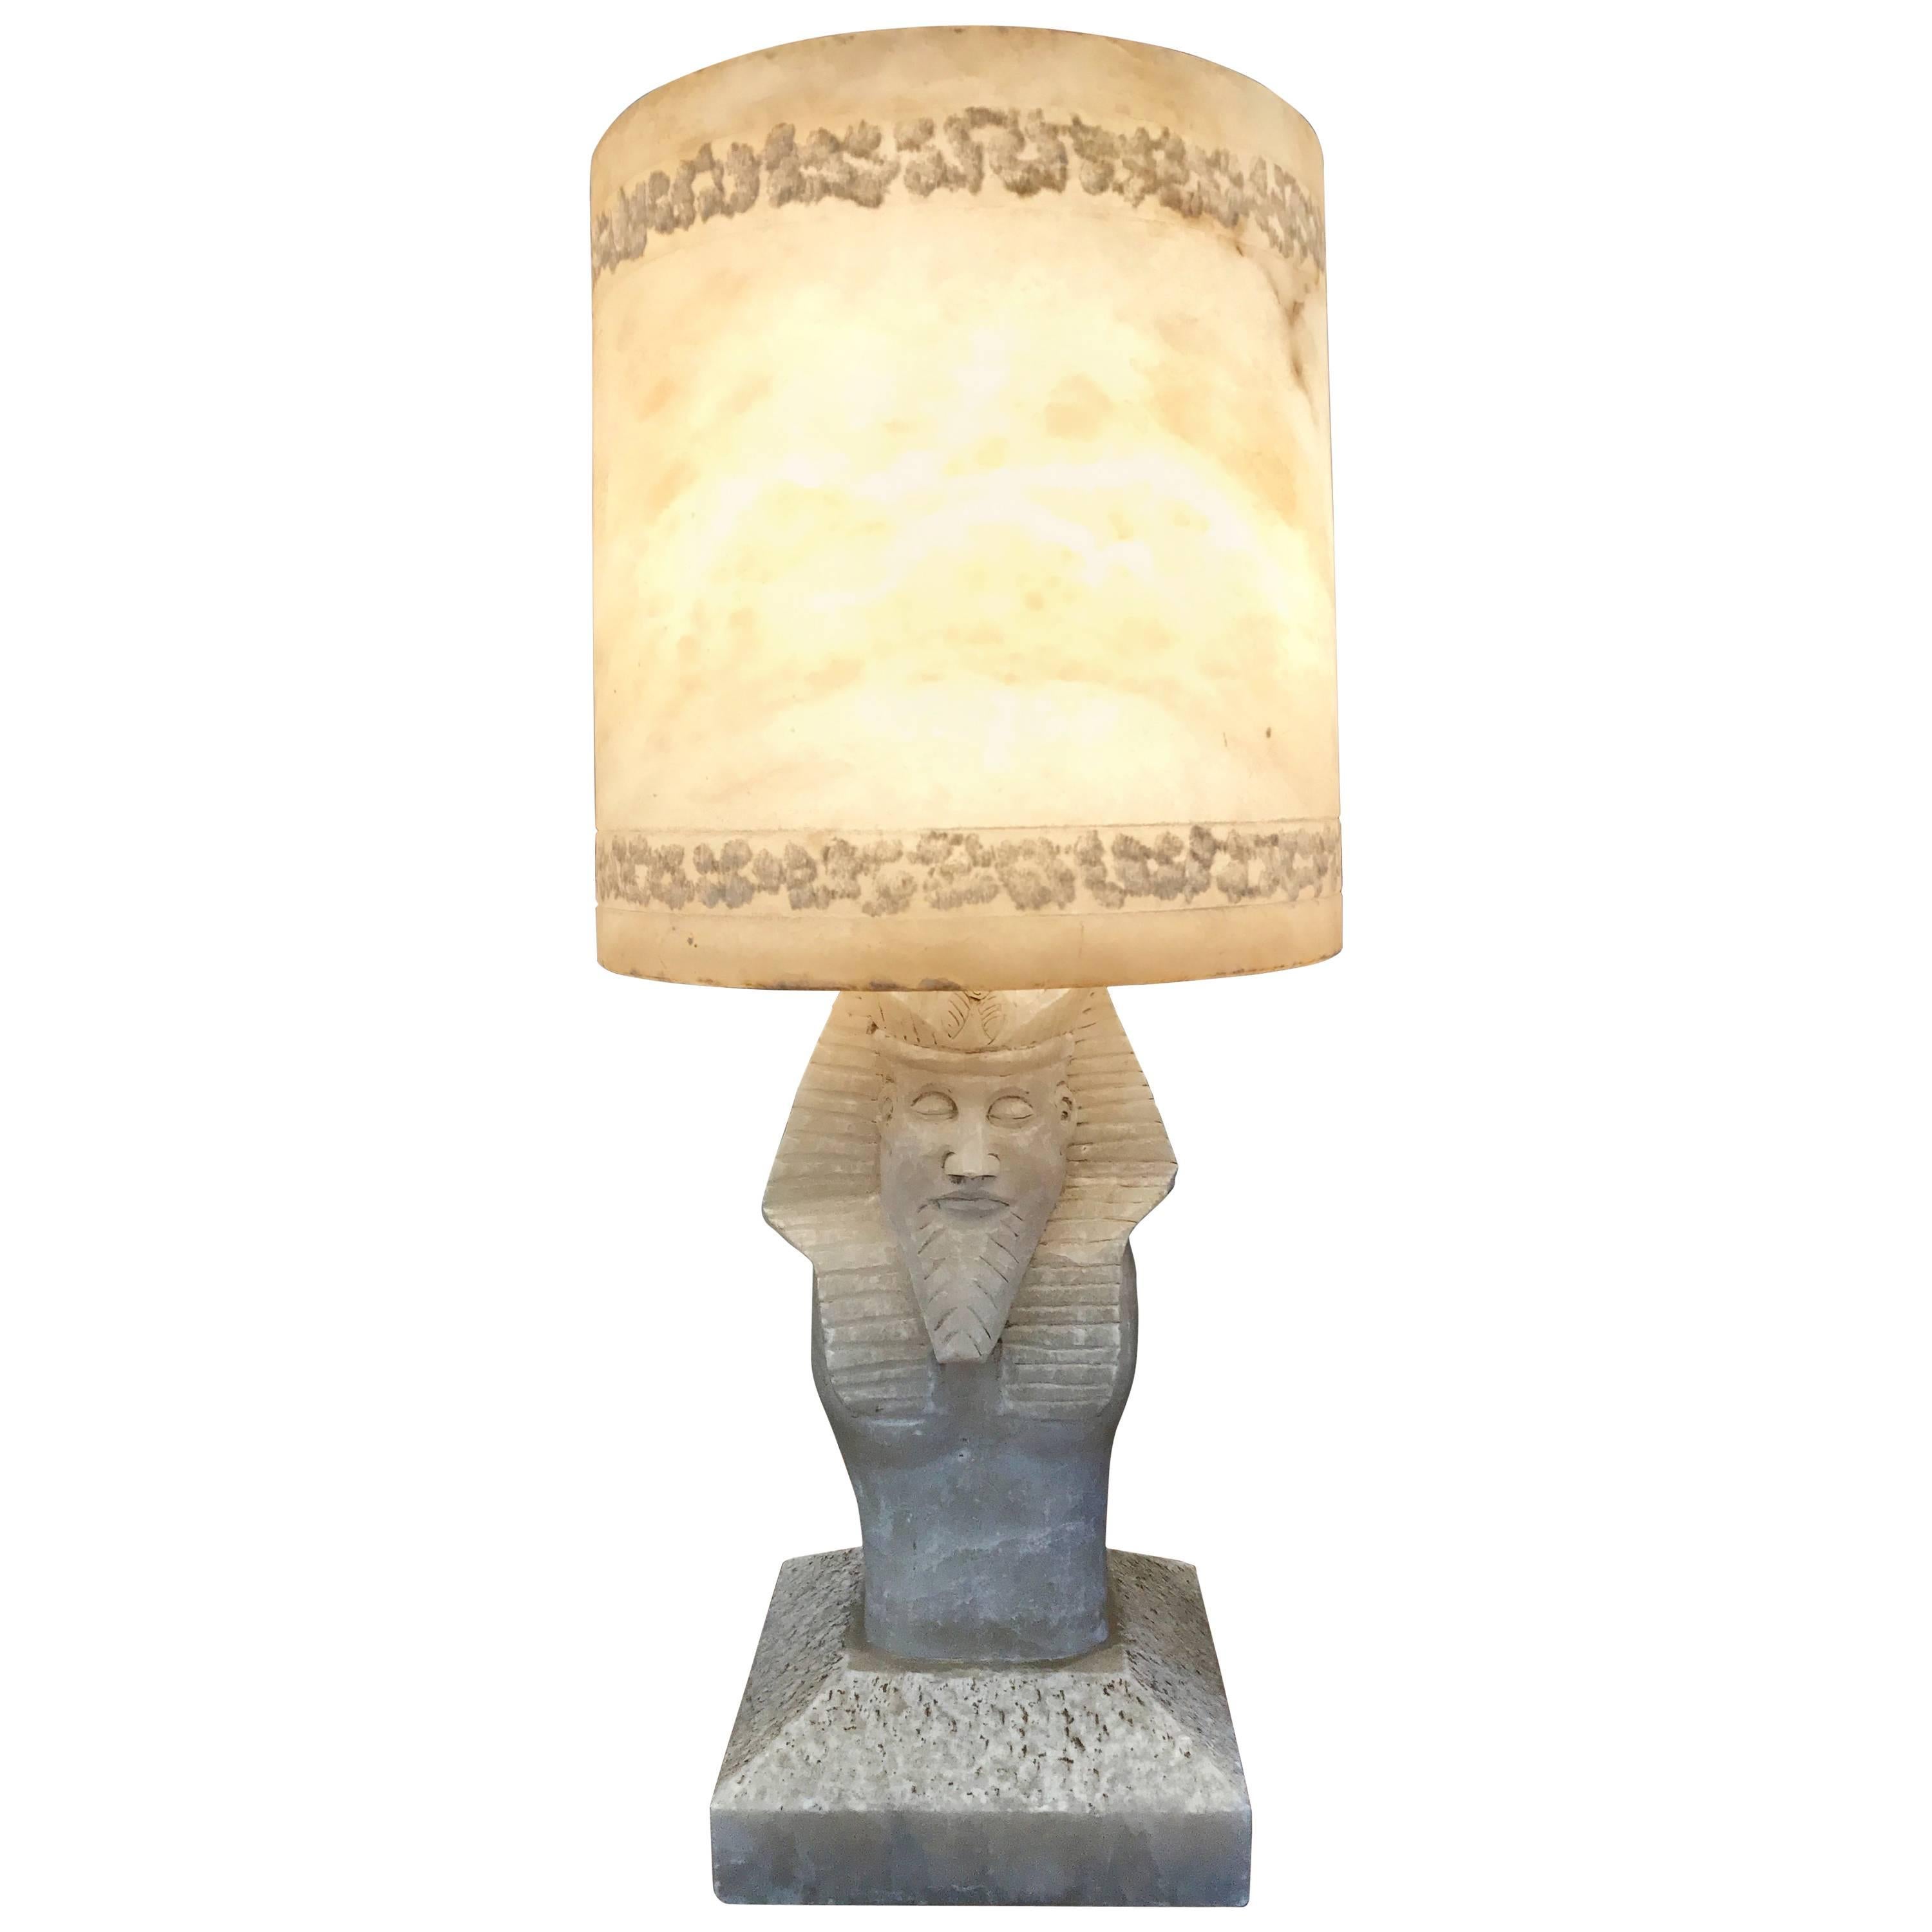 Early 20th Century Egyptian Pharaoh Alabaster Table Lamp with Alabaster Shade